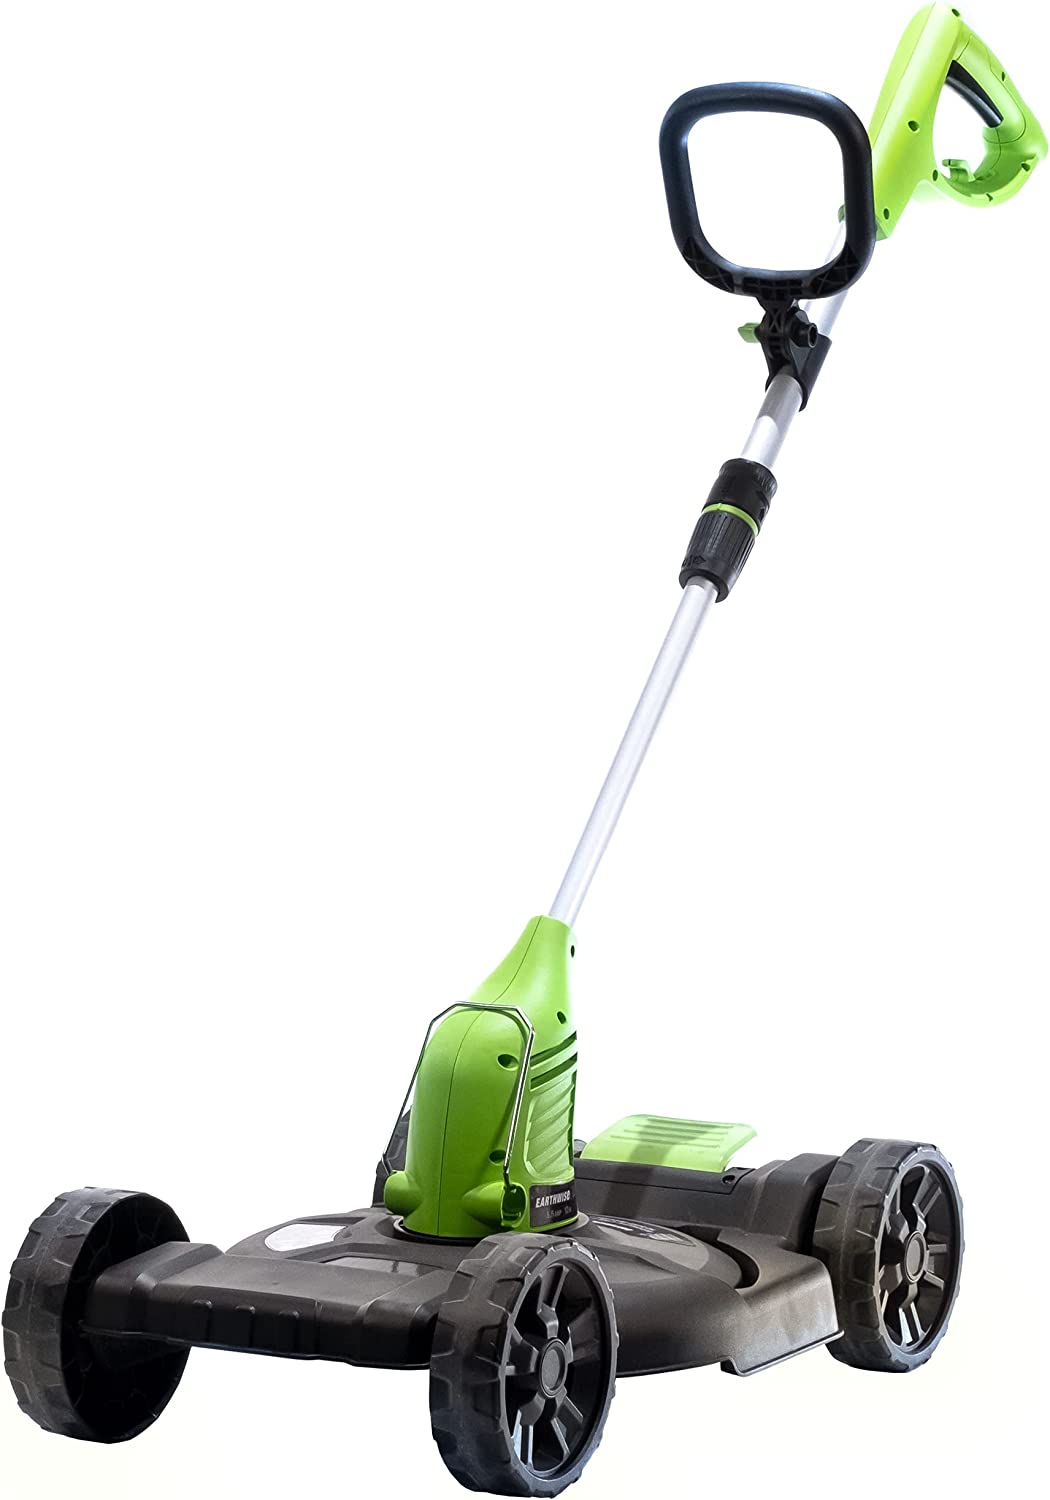 Earthwise 5.5A 12 Corded String Trimmer/Mower Combo – American Lawn Mower  Co. EST 1895